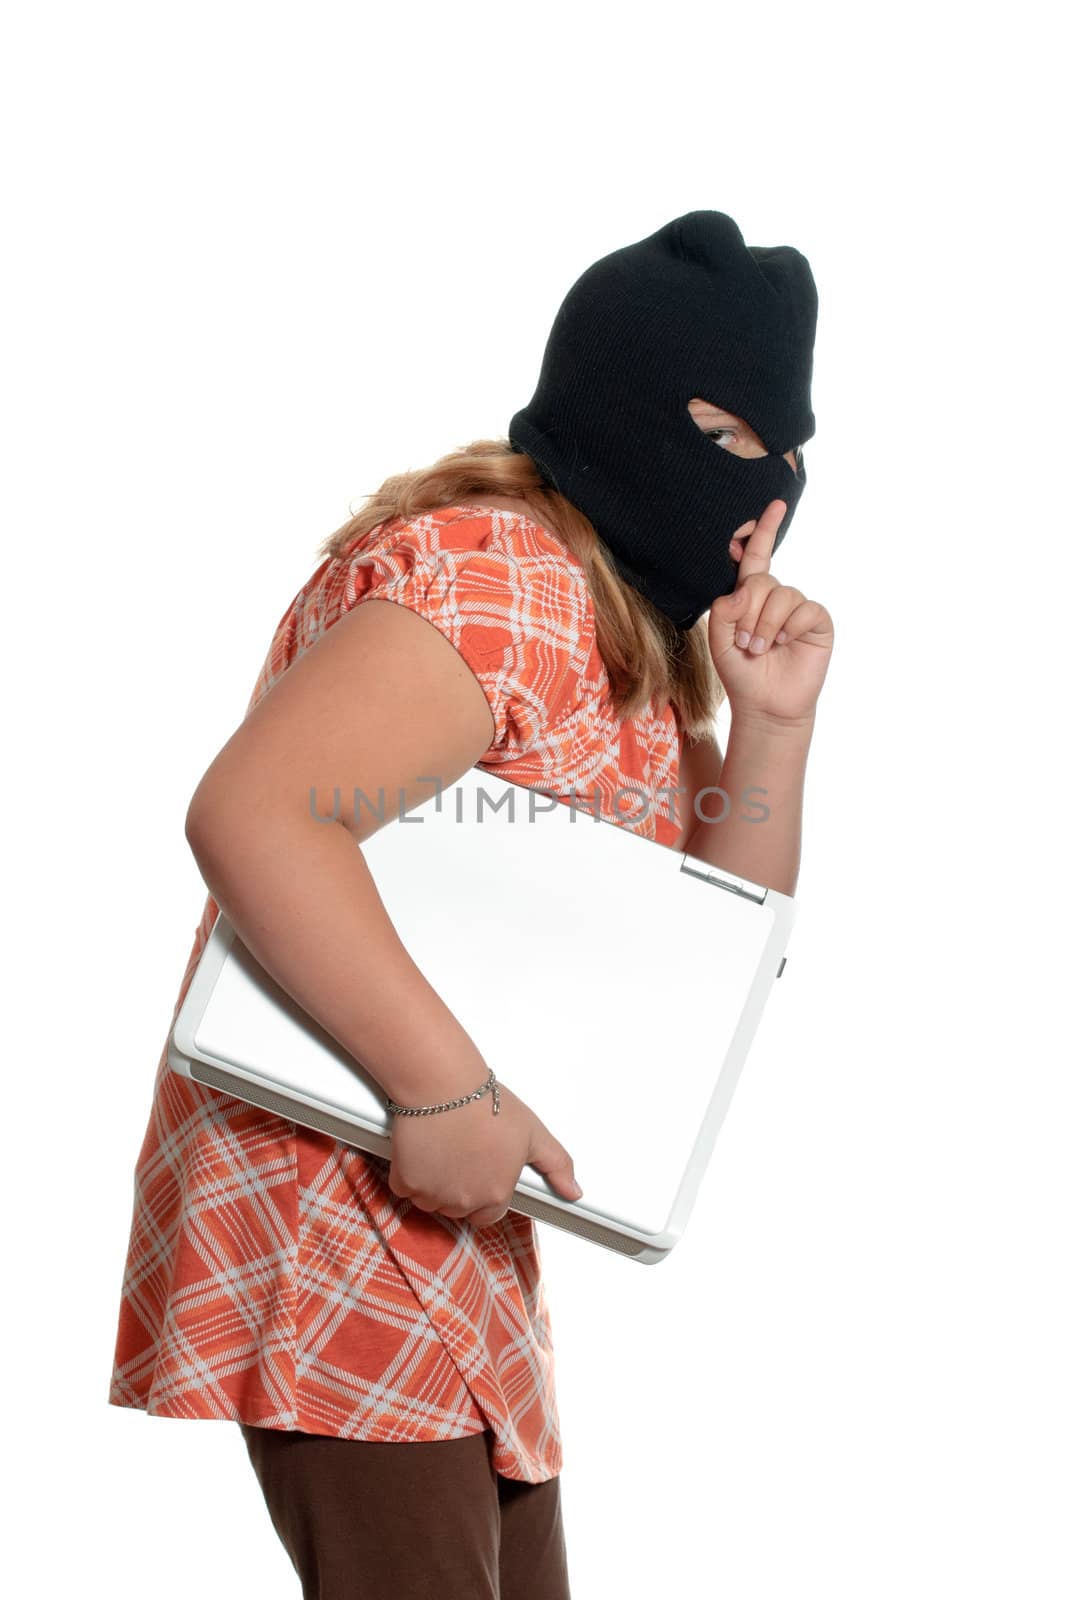 A young girl is stealing a laptop, isolated against a white background.